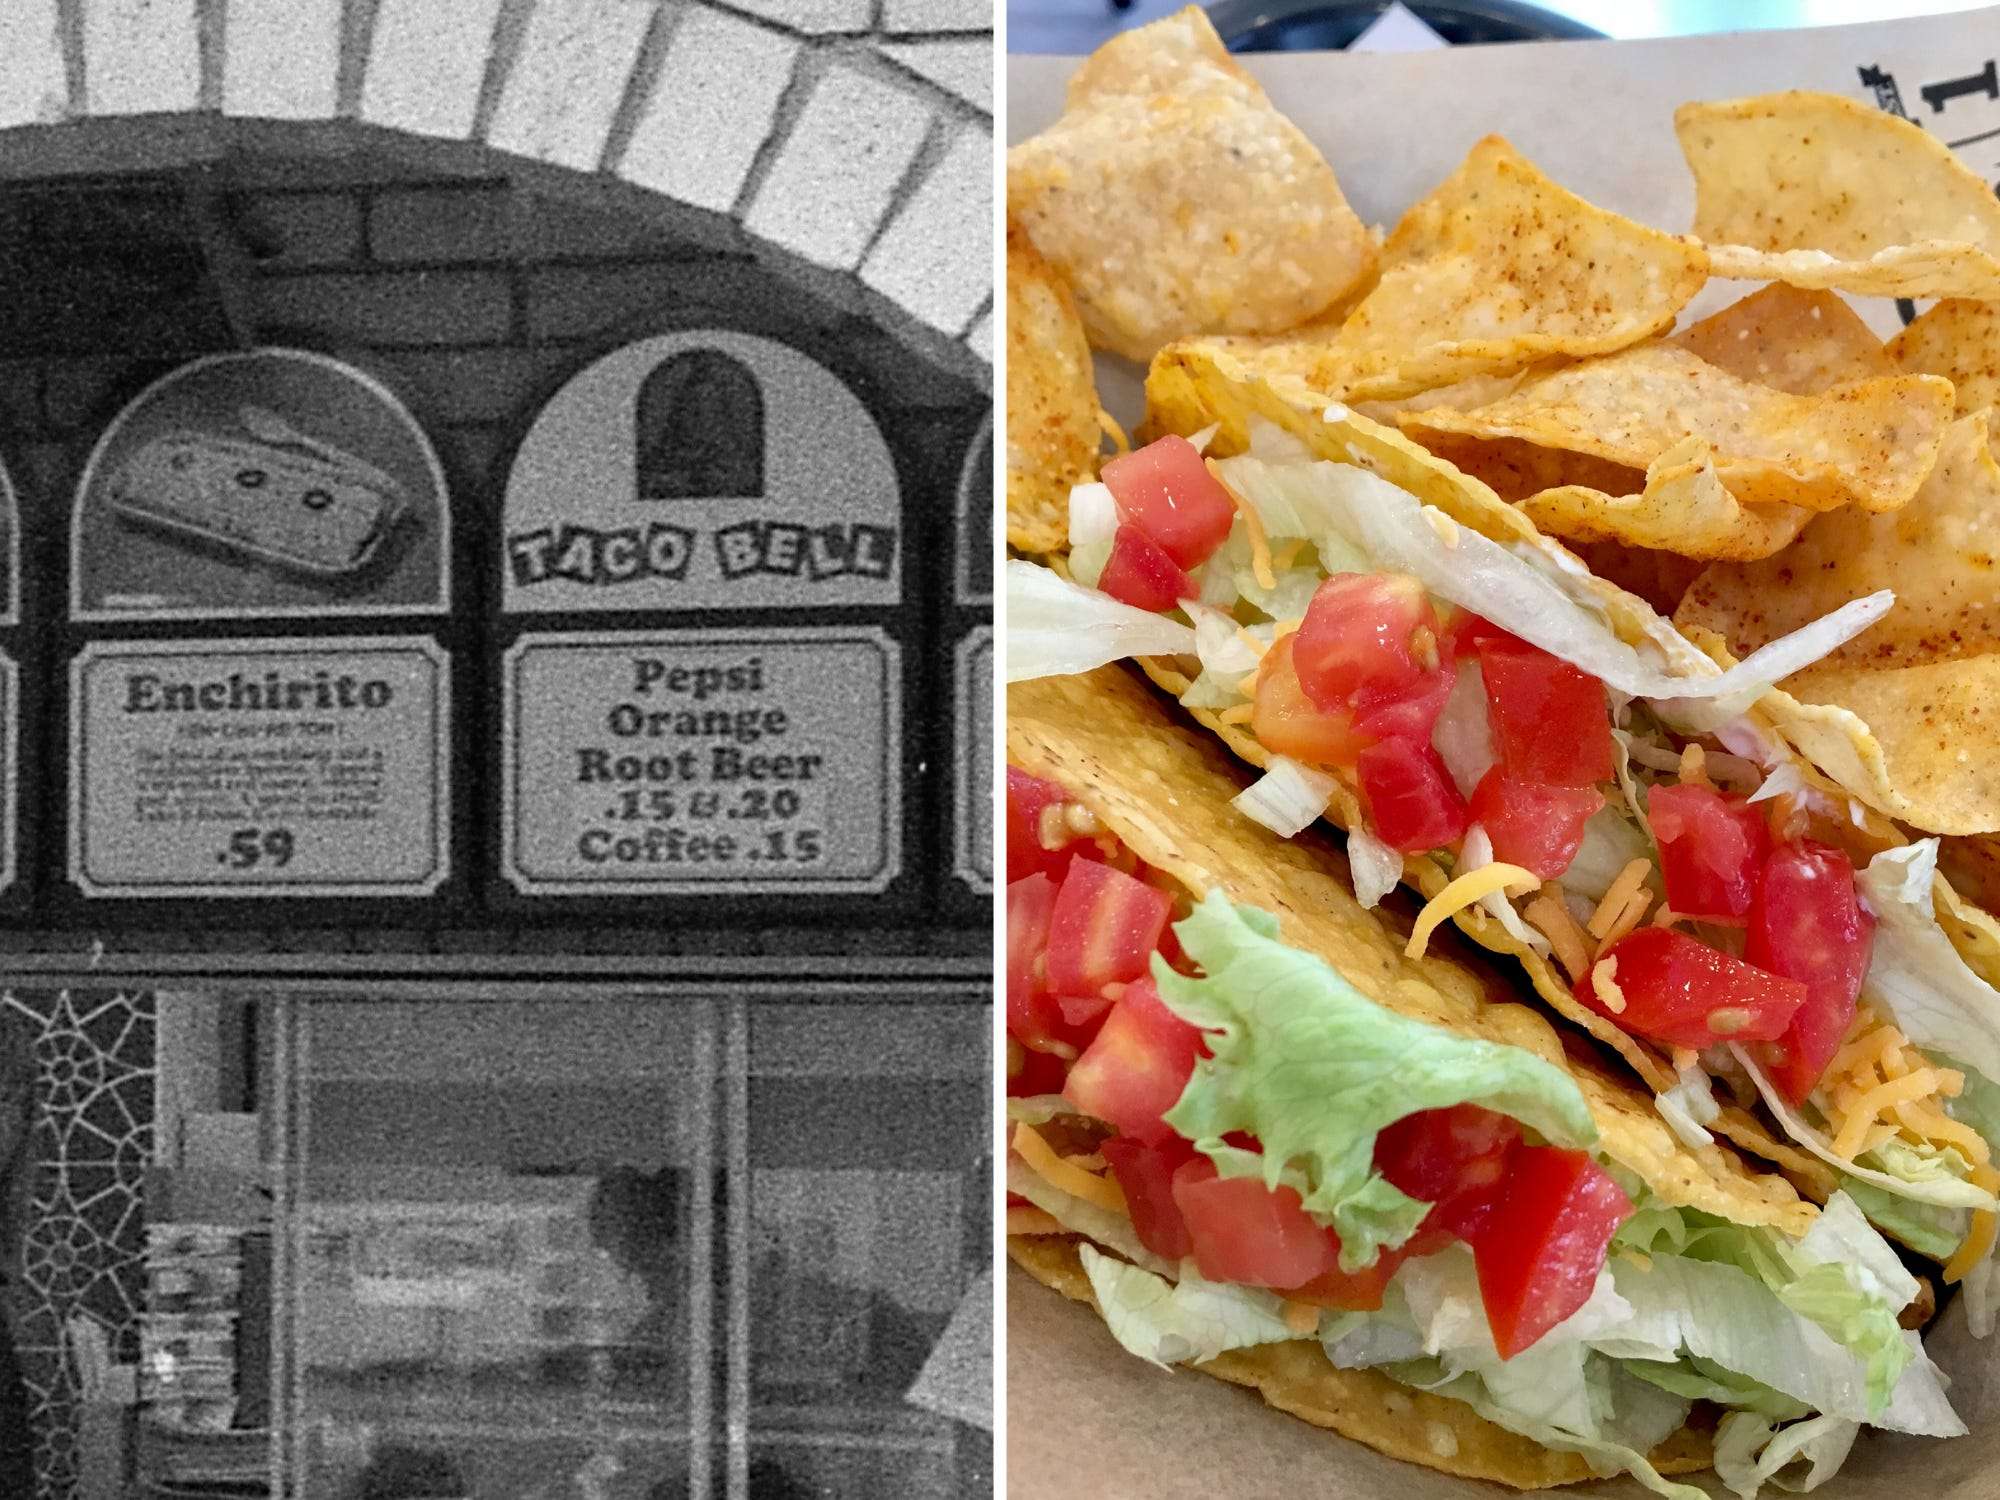 THEN AND NOW How the Taco Bell menu has changed through the years